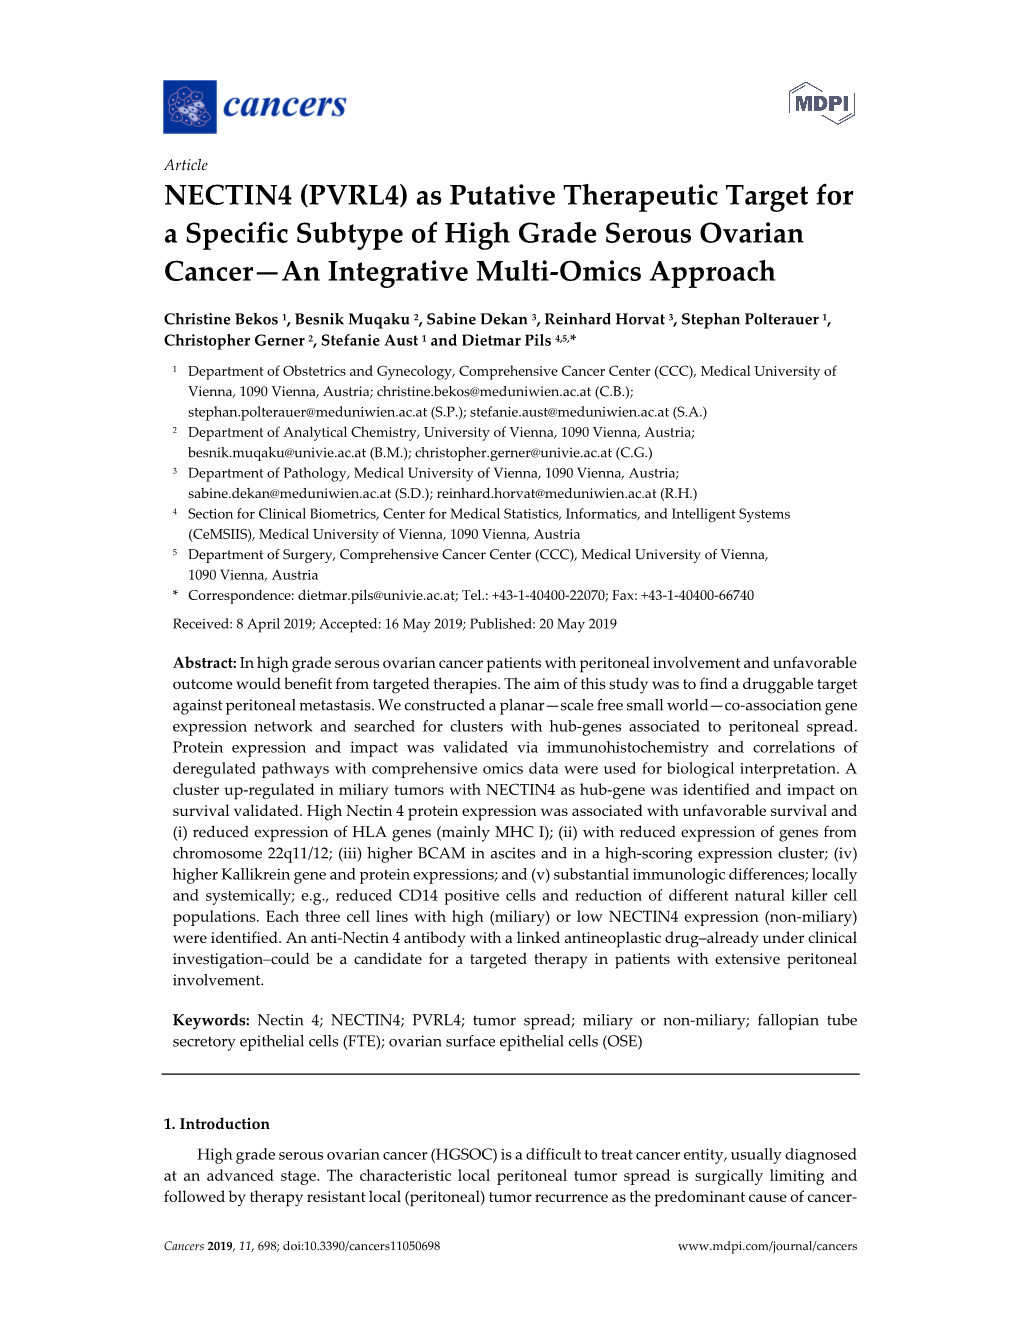 NECTIN4 (PVRL4) As Putative Therapeutic Target for a Specific Subtype of High Grade Serous Ovarian Cancer—An Integrative Multi-Omics Approach